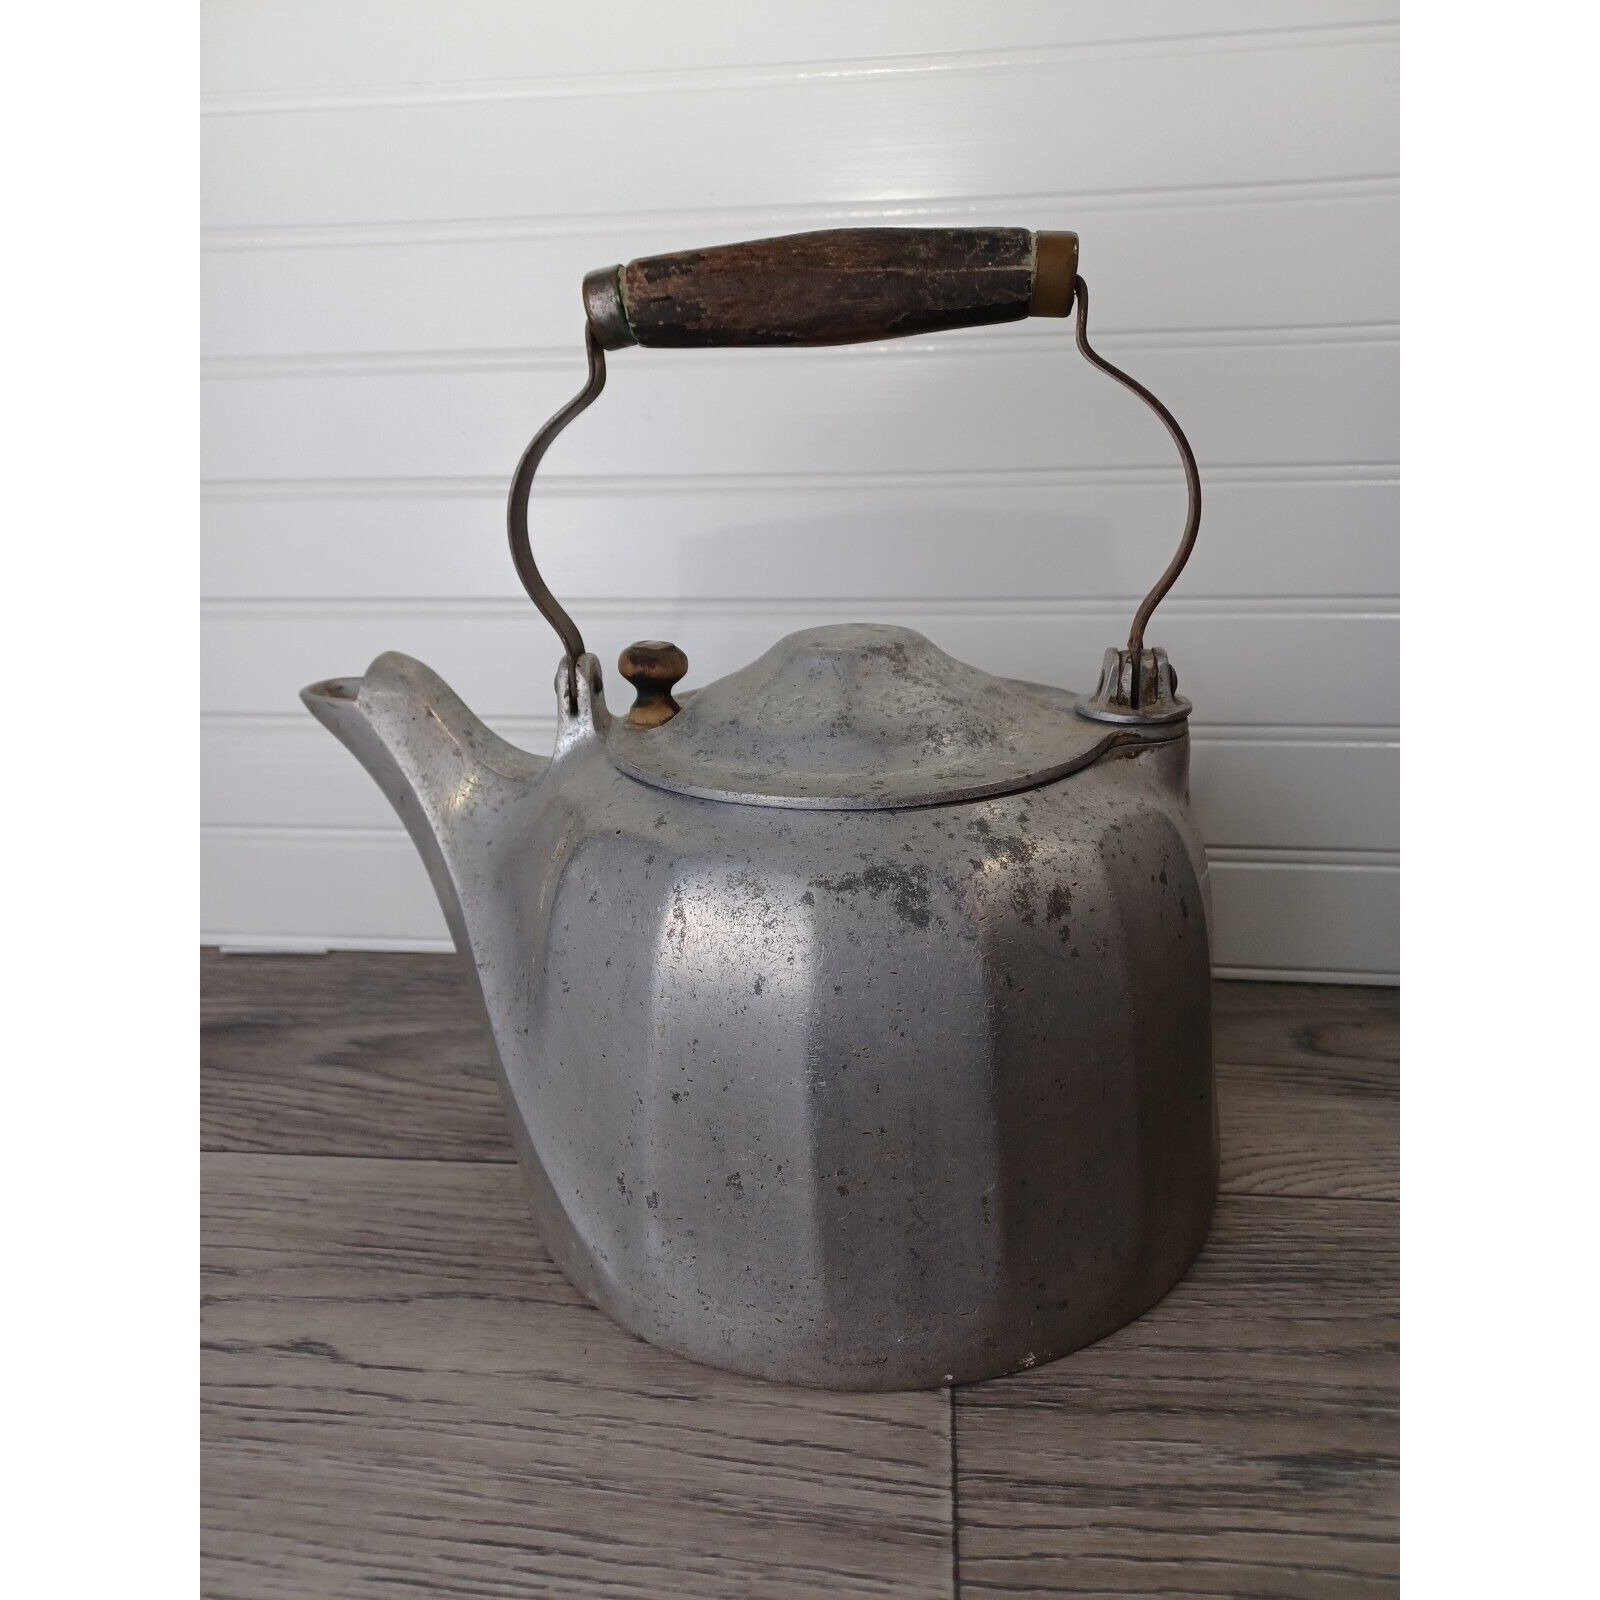 Norpro Red Stainless Steel Whistling Tea Kettle